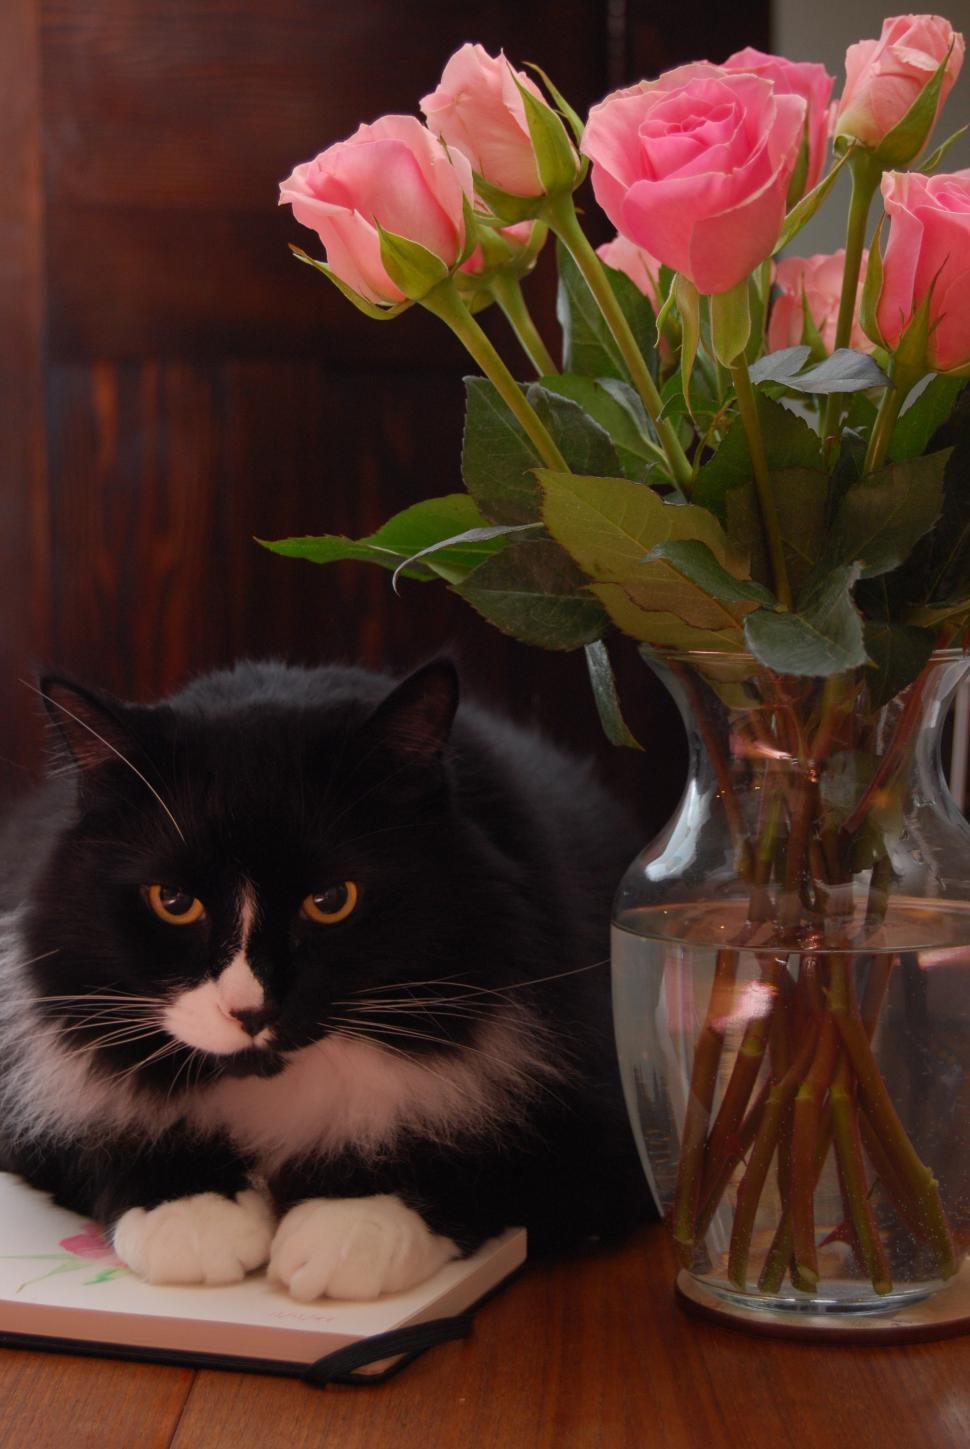 Free Image of Black and White Cat Sitting Beside a Vase of Roses 